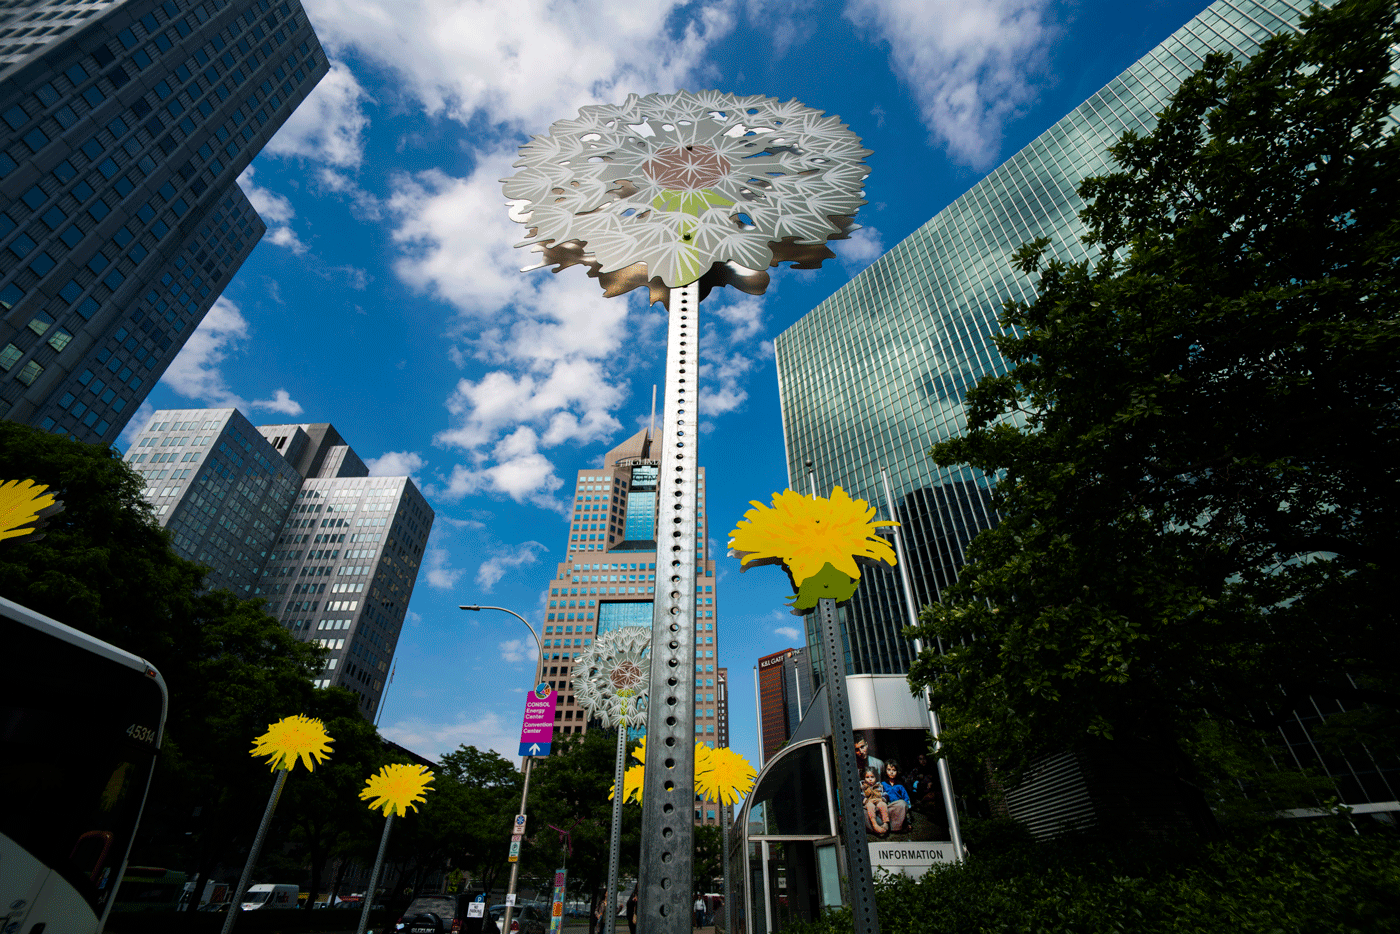 Dandelion sculptures stand in front of the Pittsburgh skyline